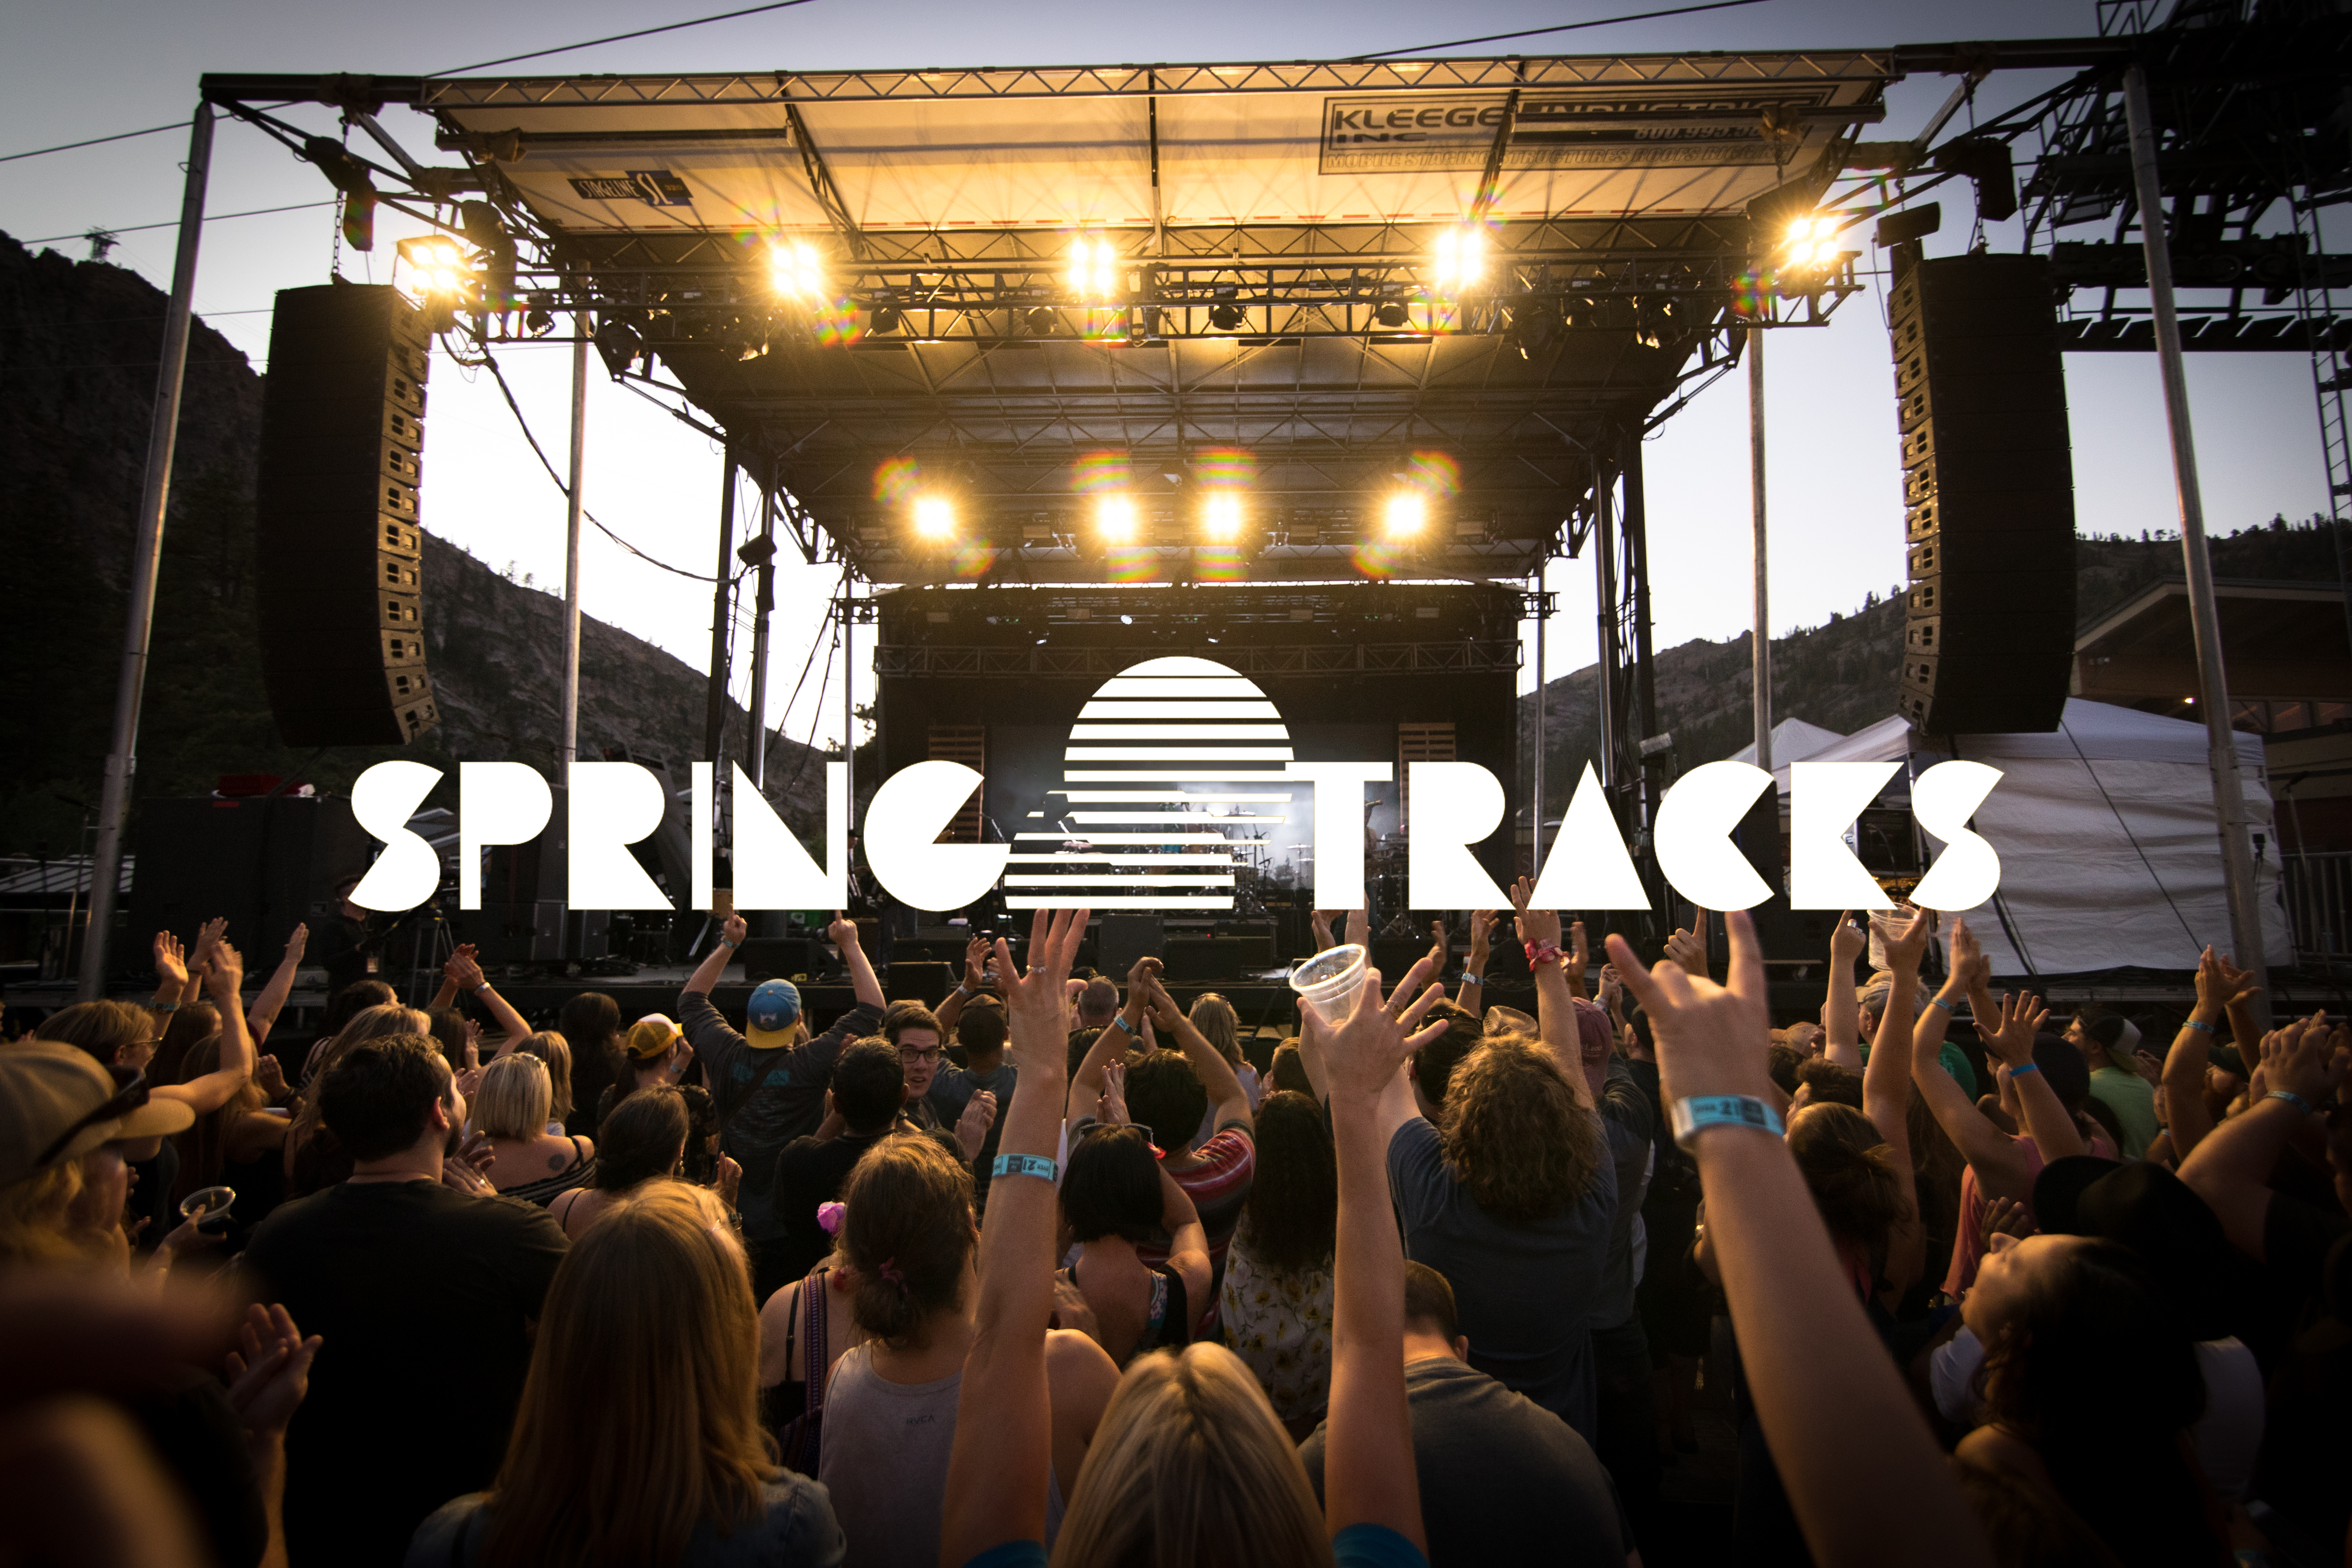 The Spring Tracks Concert will take place on April 16th, 2022 following Cushing Crossing.